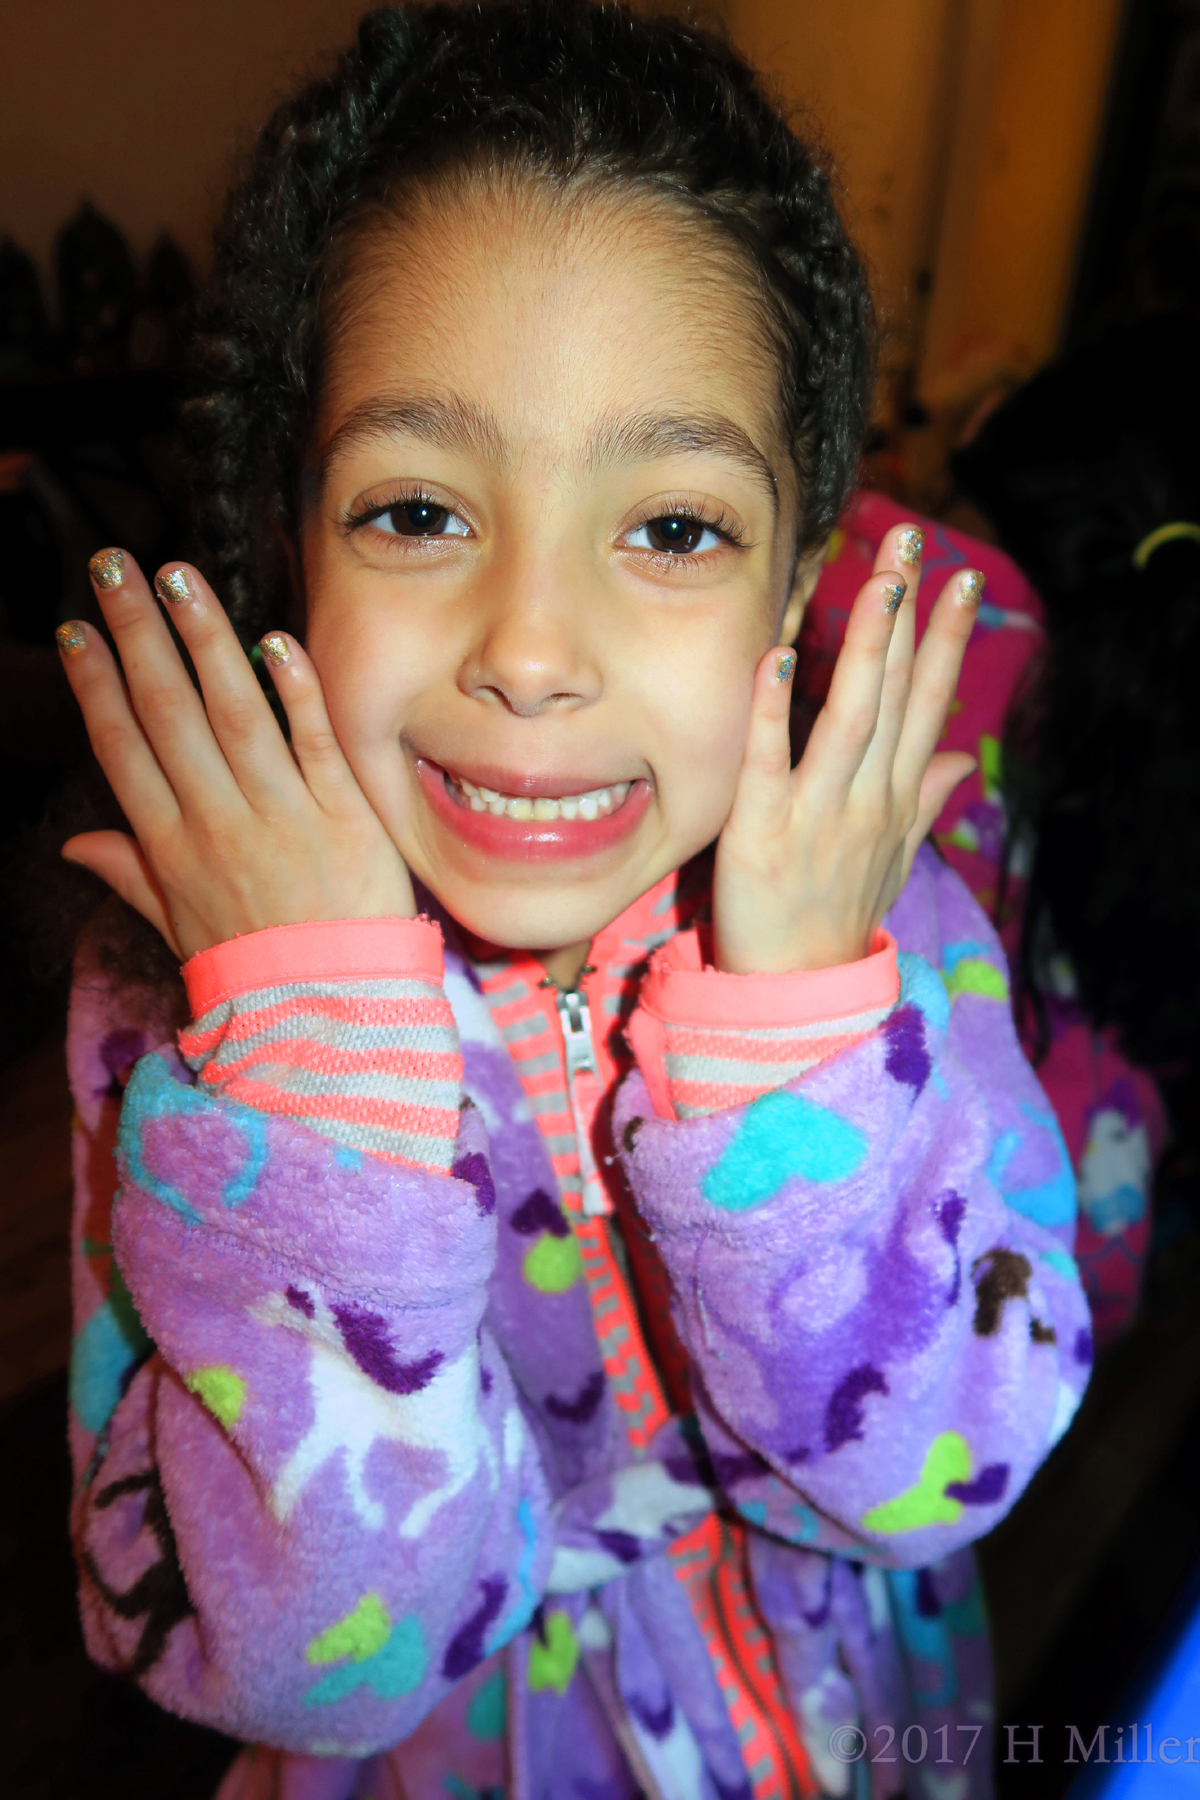 Big Smiles After Her Kids Mini Manicure. 